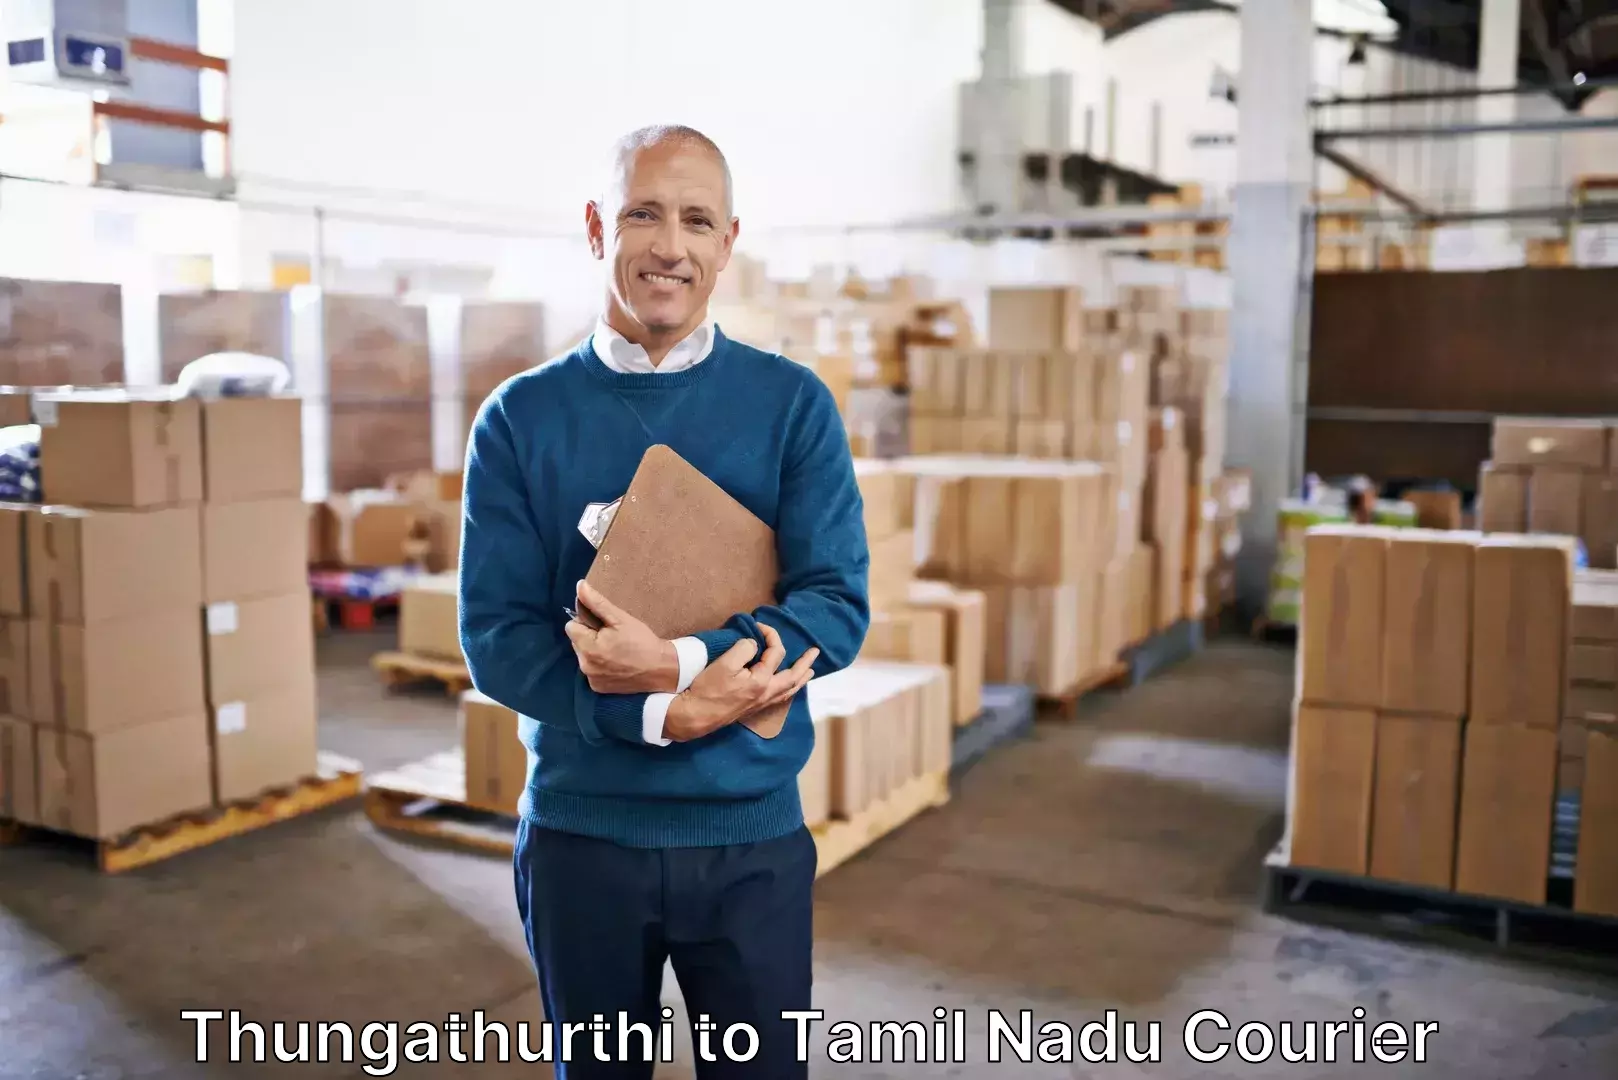 Hassle-free luggage shipping in Thungathurthi to Mettala